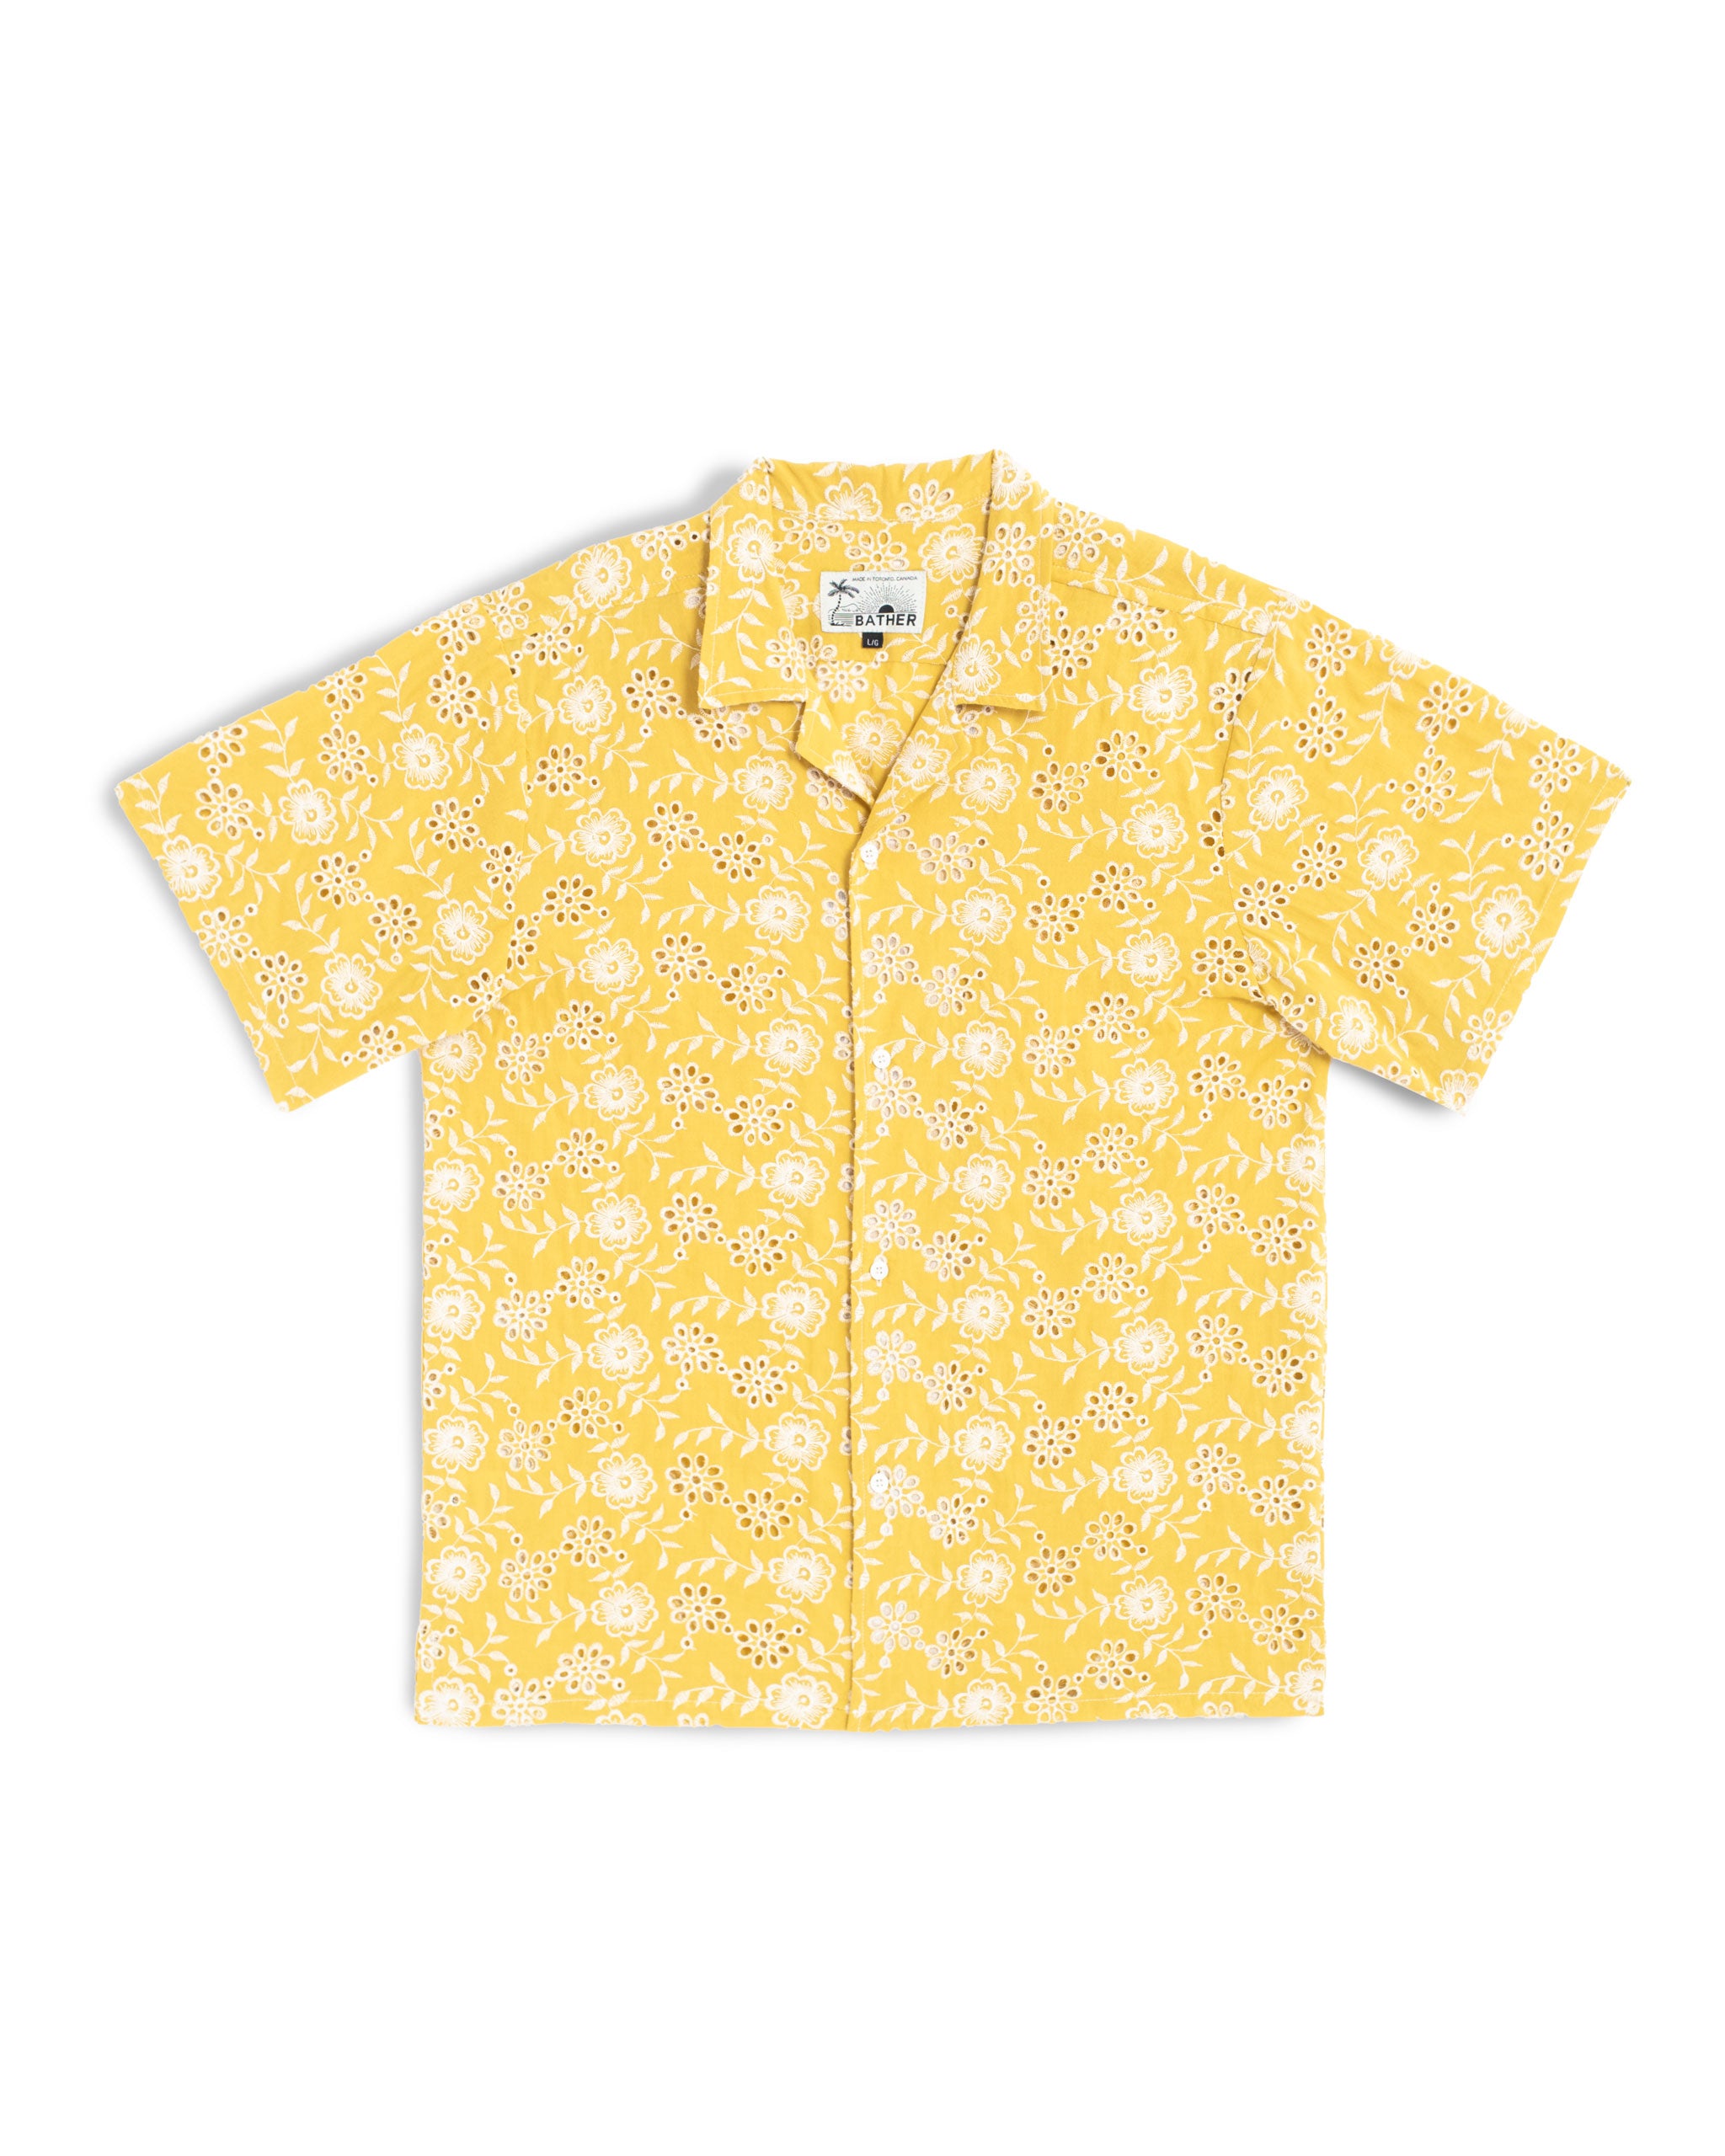 Yellow camp shirt with an embroidered floral pattern